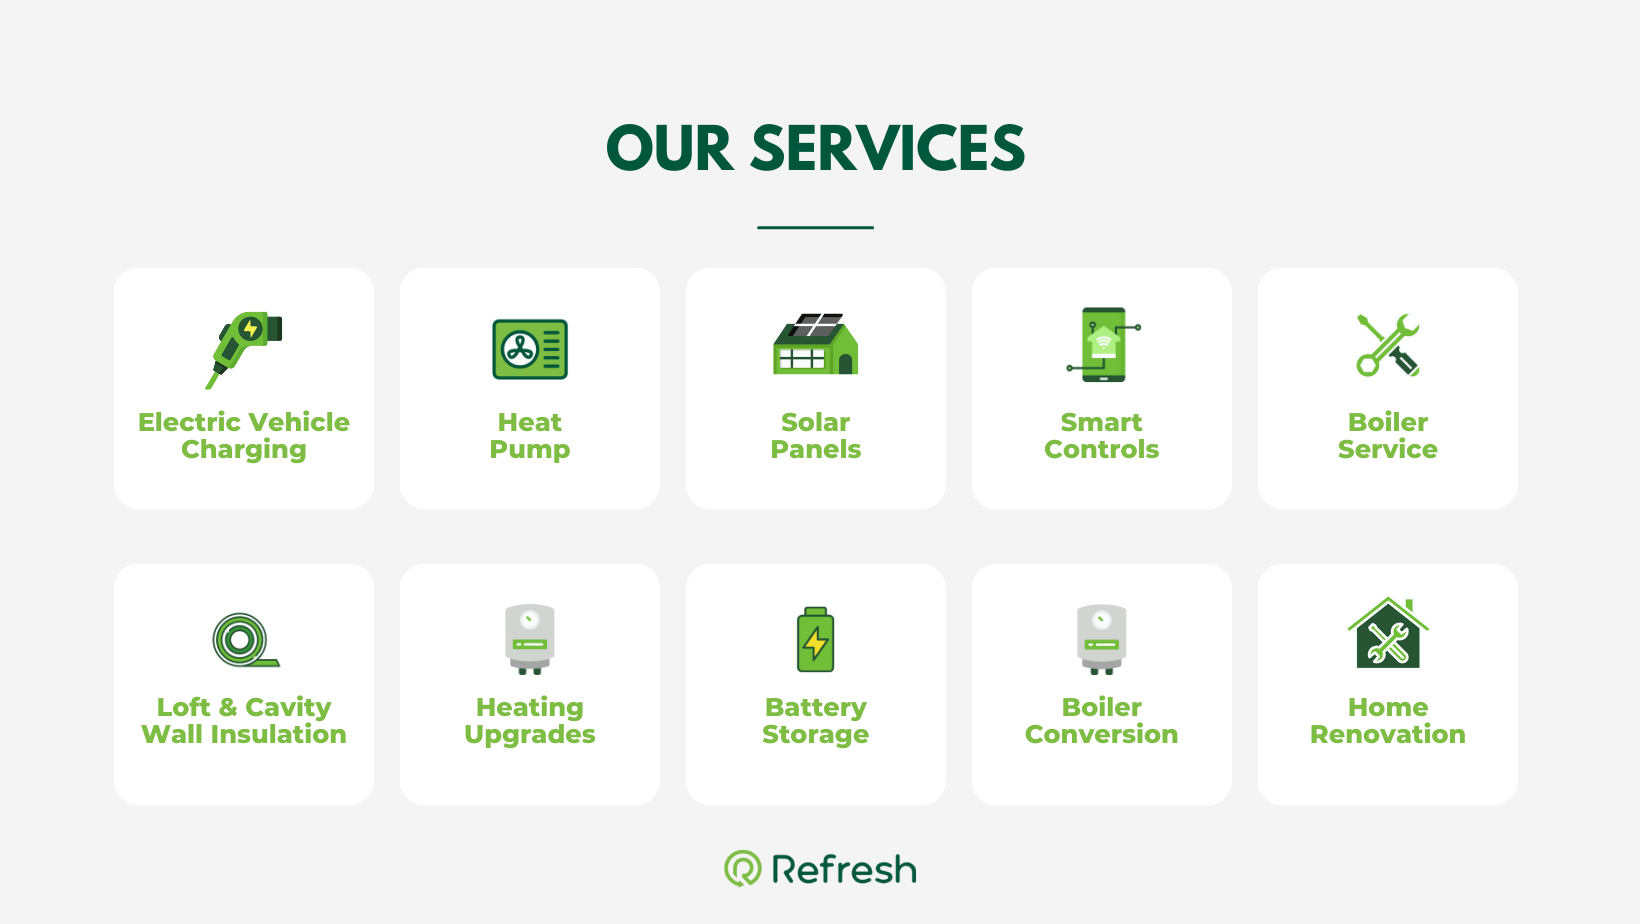 Our Services - Electric Vehicle Charging, Heat Pump, Solar Panels, Smart Controls, Boiler Service, Loft and Cavity Wall Insulation, Heating Upgrades, Battery Storage, Boiler Conversion, Home Renovation.